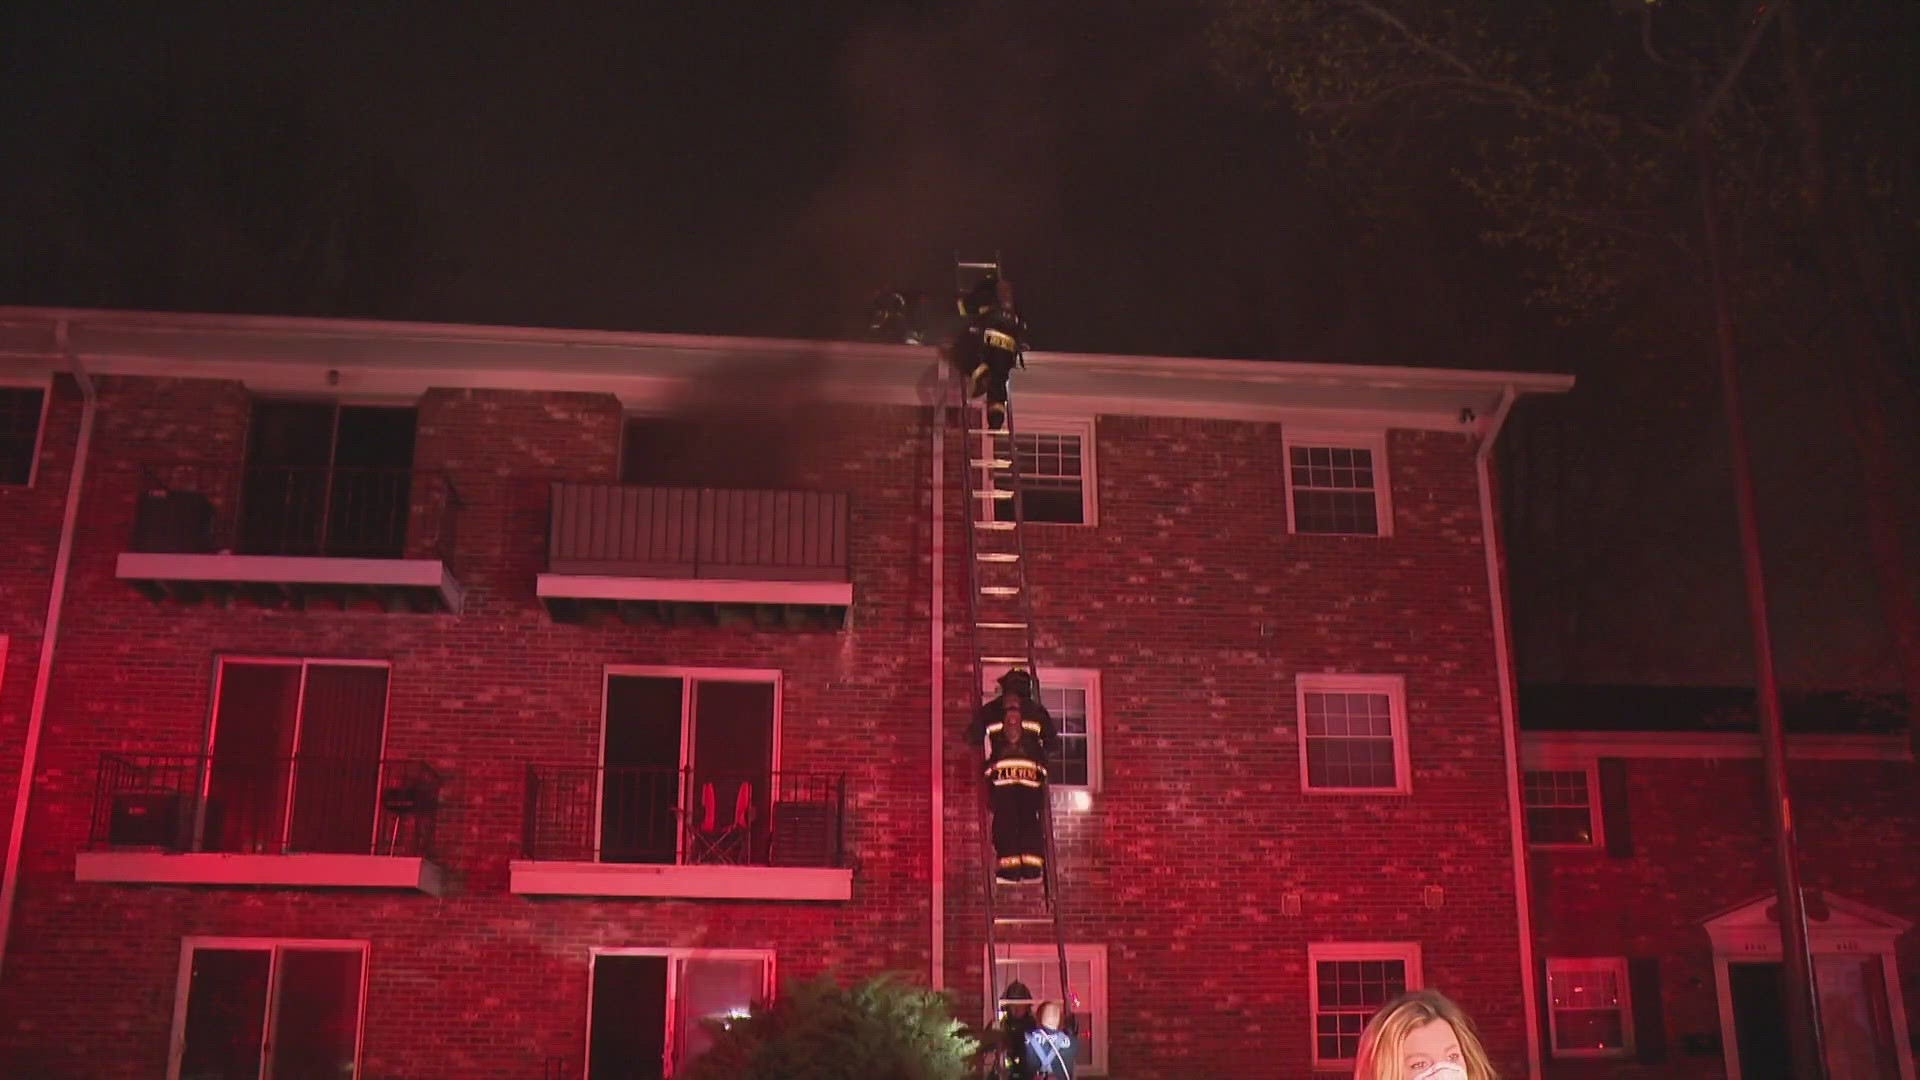 Resident leapt from balconies after a fire broke out at the Highland Pointe Apartments.